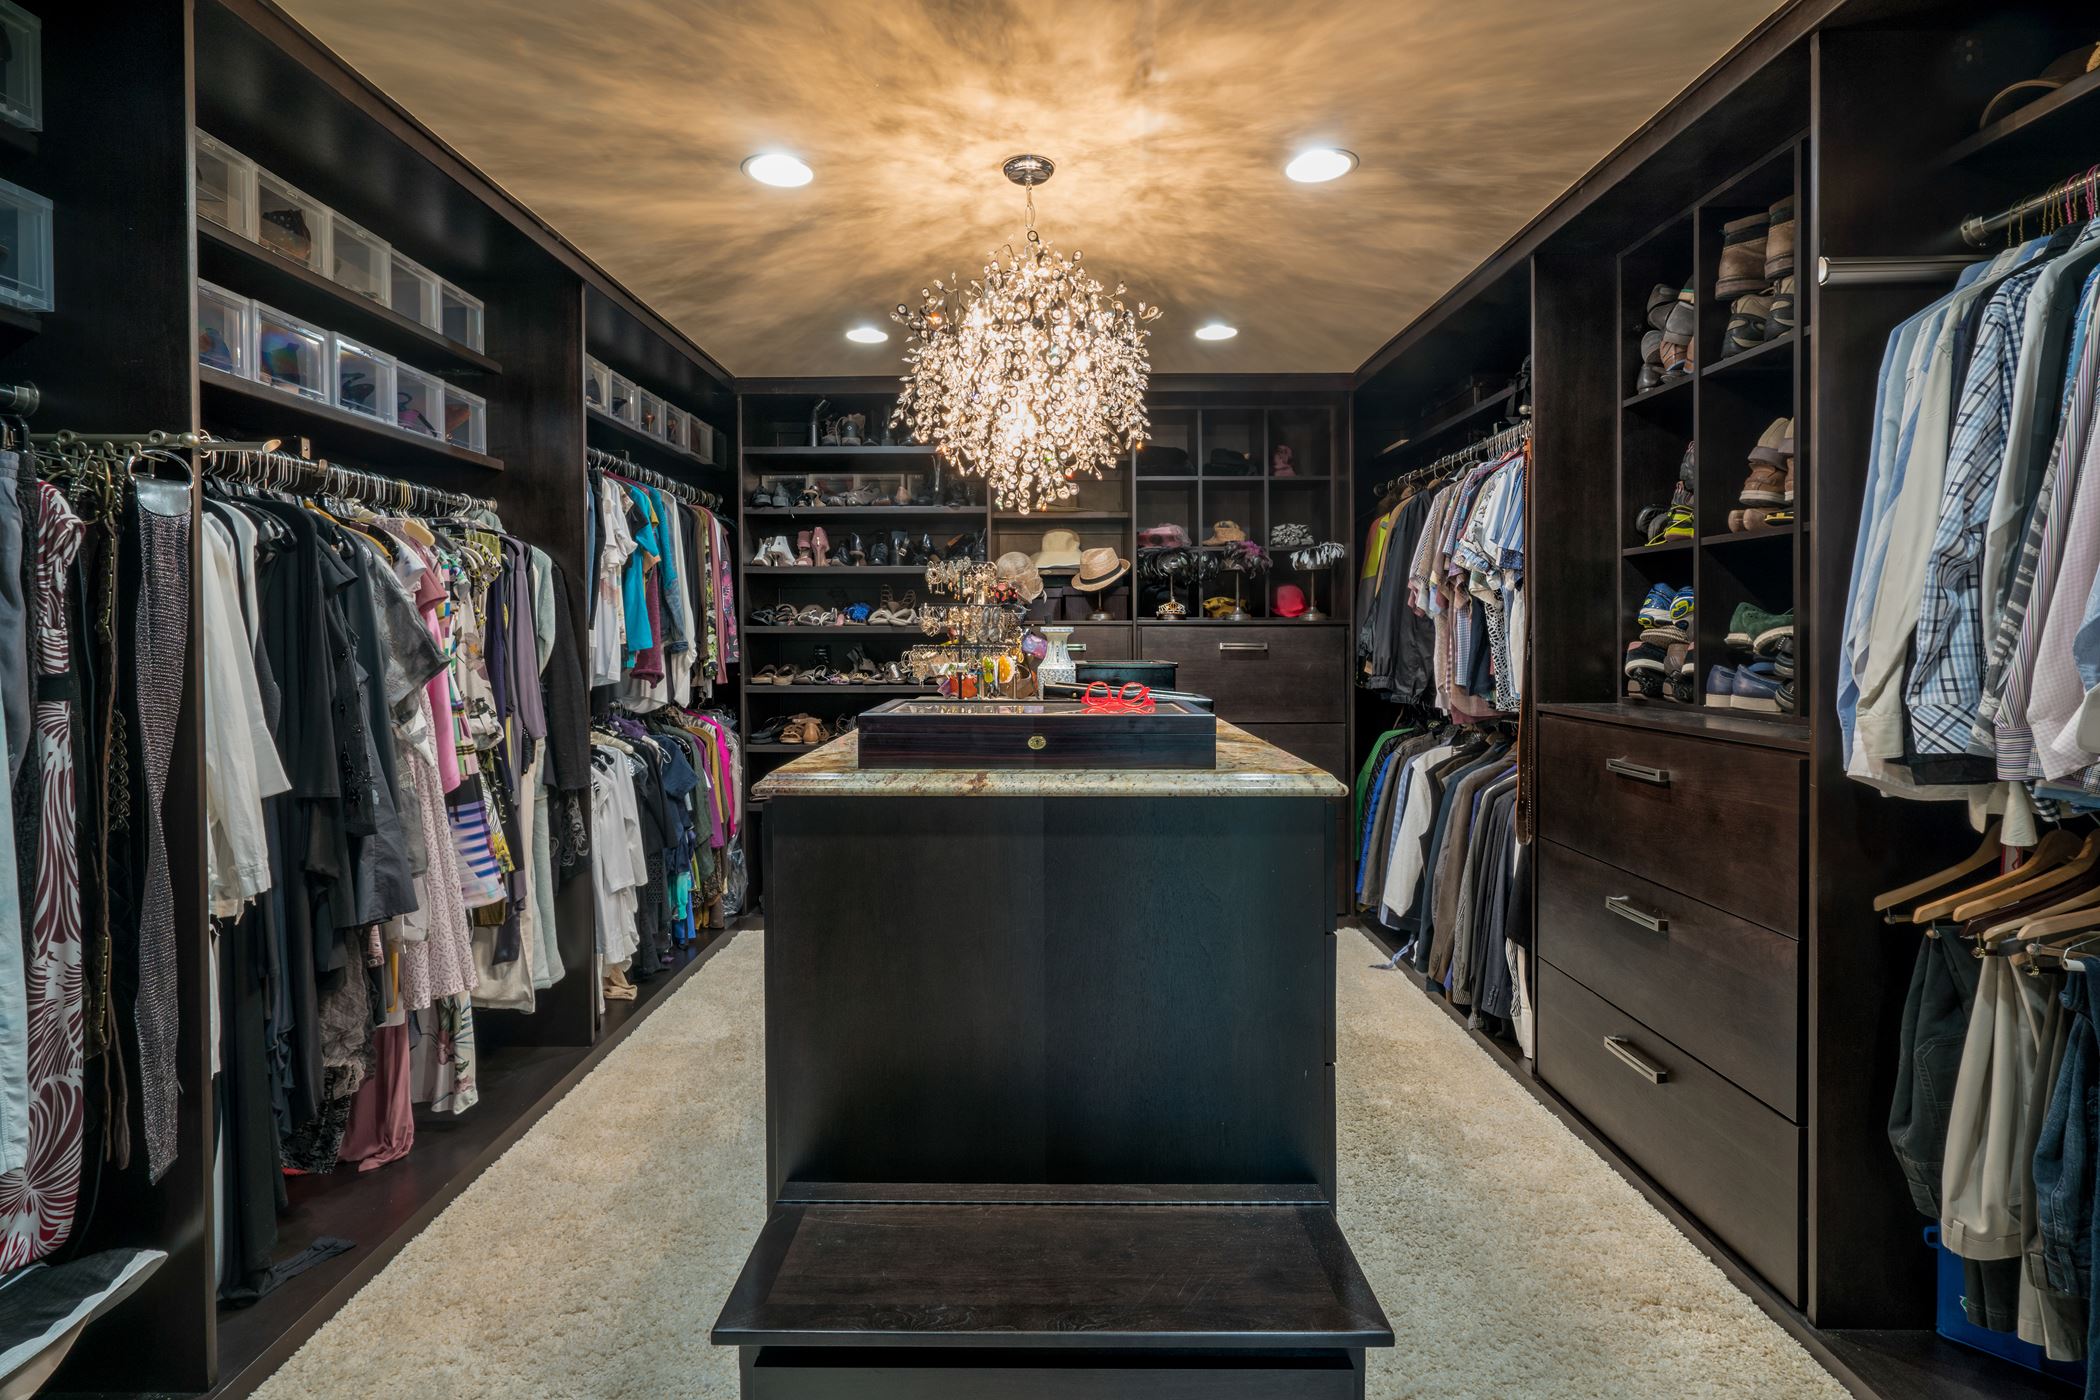 Closet Dreams | Gallery | Custom Wood Products - Handcrafted Cabinets